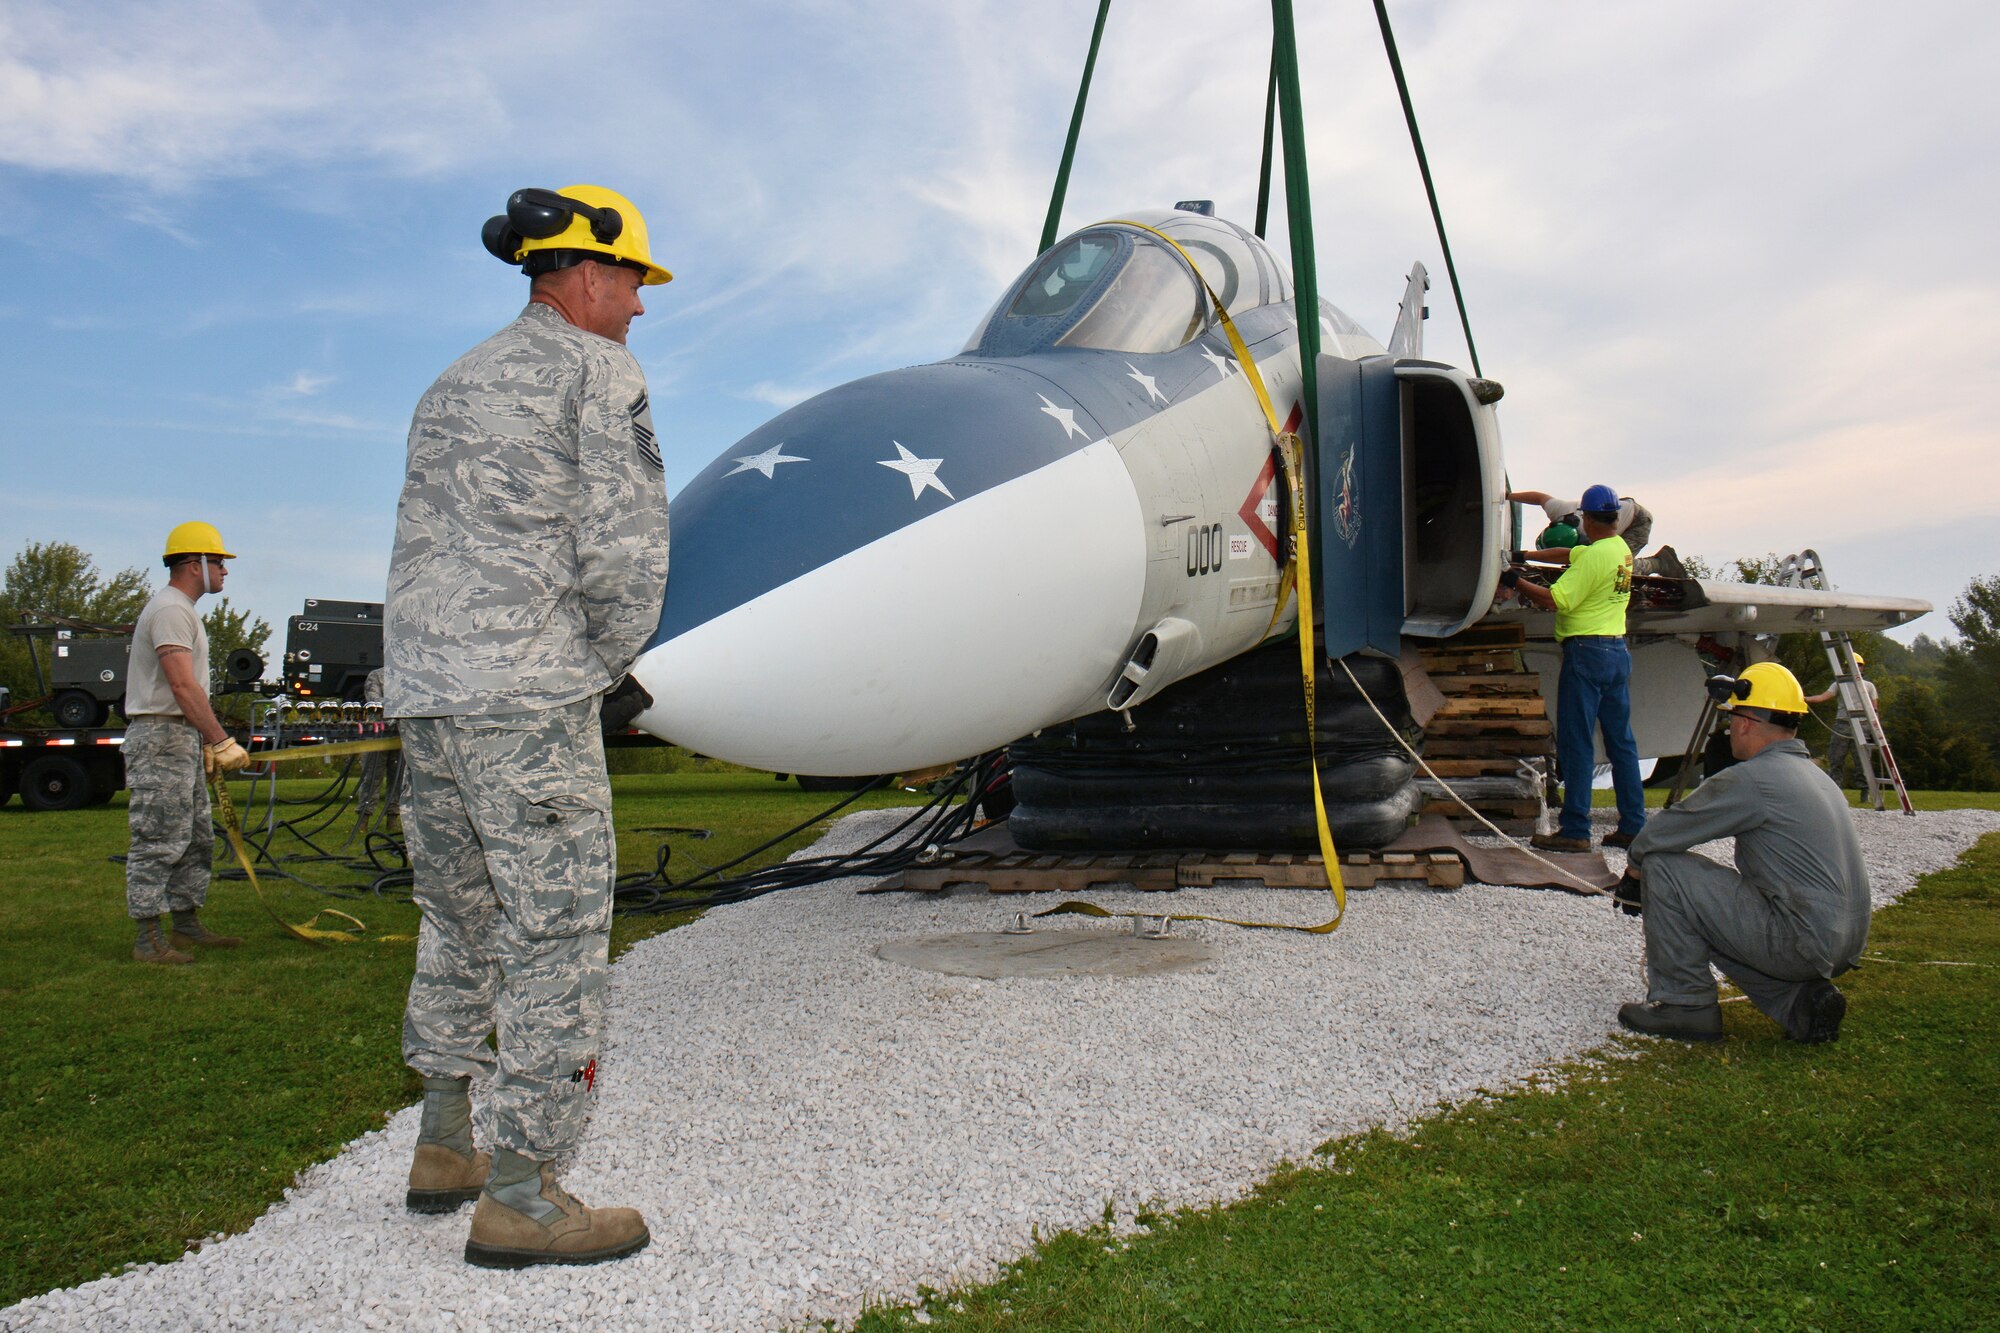 Members of the Wisconsin Air National Guard's 115th Fighter Wing Crash Damage or Disabled Aircraft Recovery team, reconstruct an F-4S Phantom static display on the grounds of Truax-Longmire Veterans of Foreign Wars Post 8483 in Madison, Wis., Sept. 20, 2014. The eight airmen representing the 115 FW CDDAR team were able to complete critical training requirements by removing and relocating the aircraft to Madison from its previous home at Camp Atterbury, Ind. (Air National Guard Photo by Master Sgt. Paul Gorman)